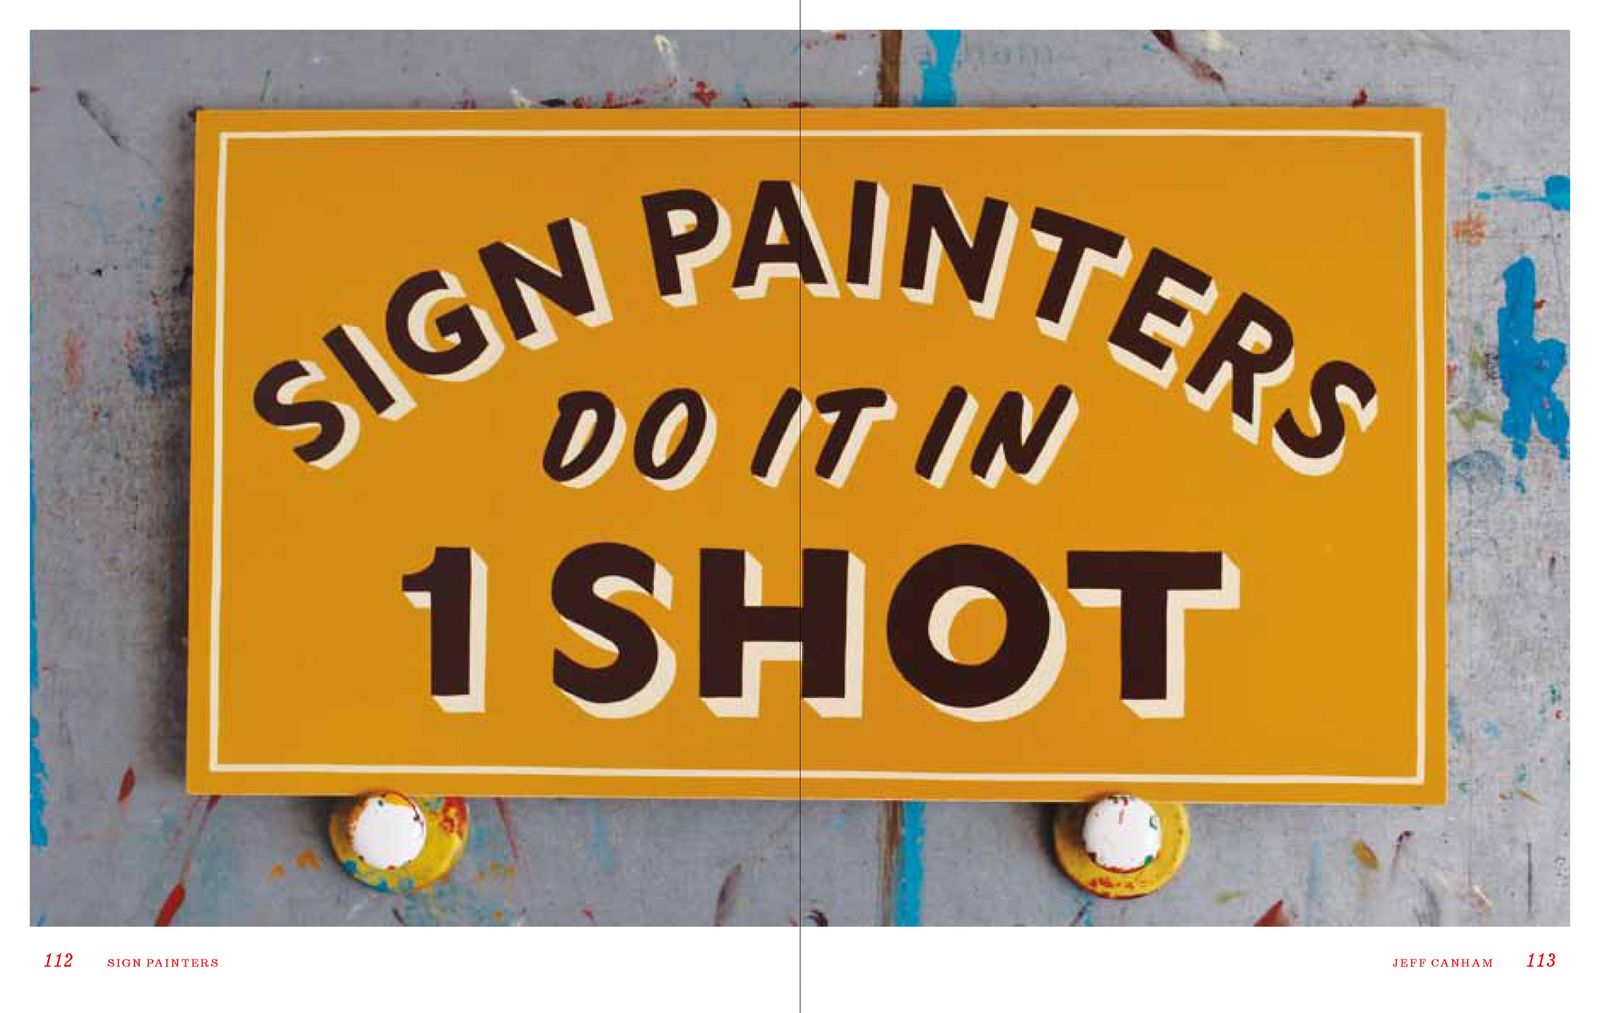 Painted sign reading "Sign Painters do it in 1 Shot"